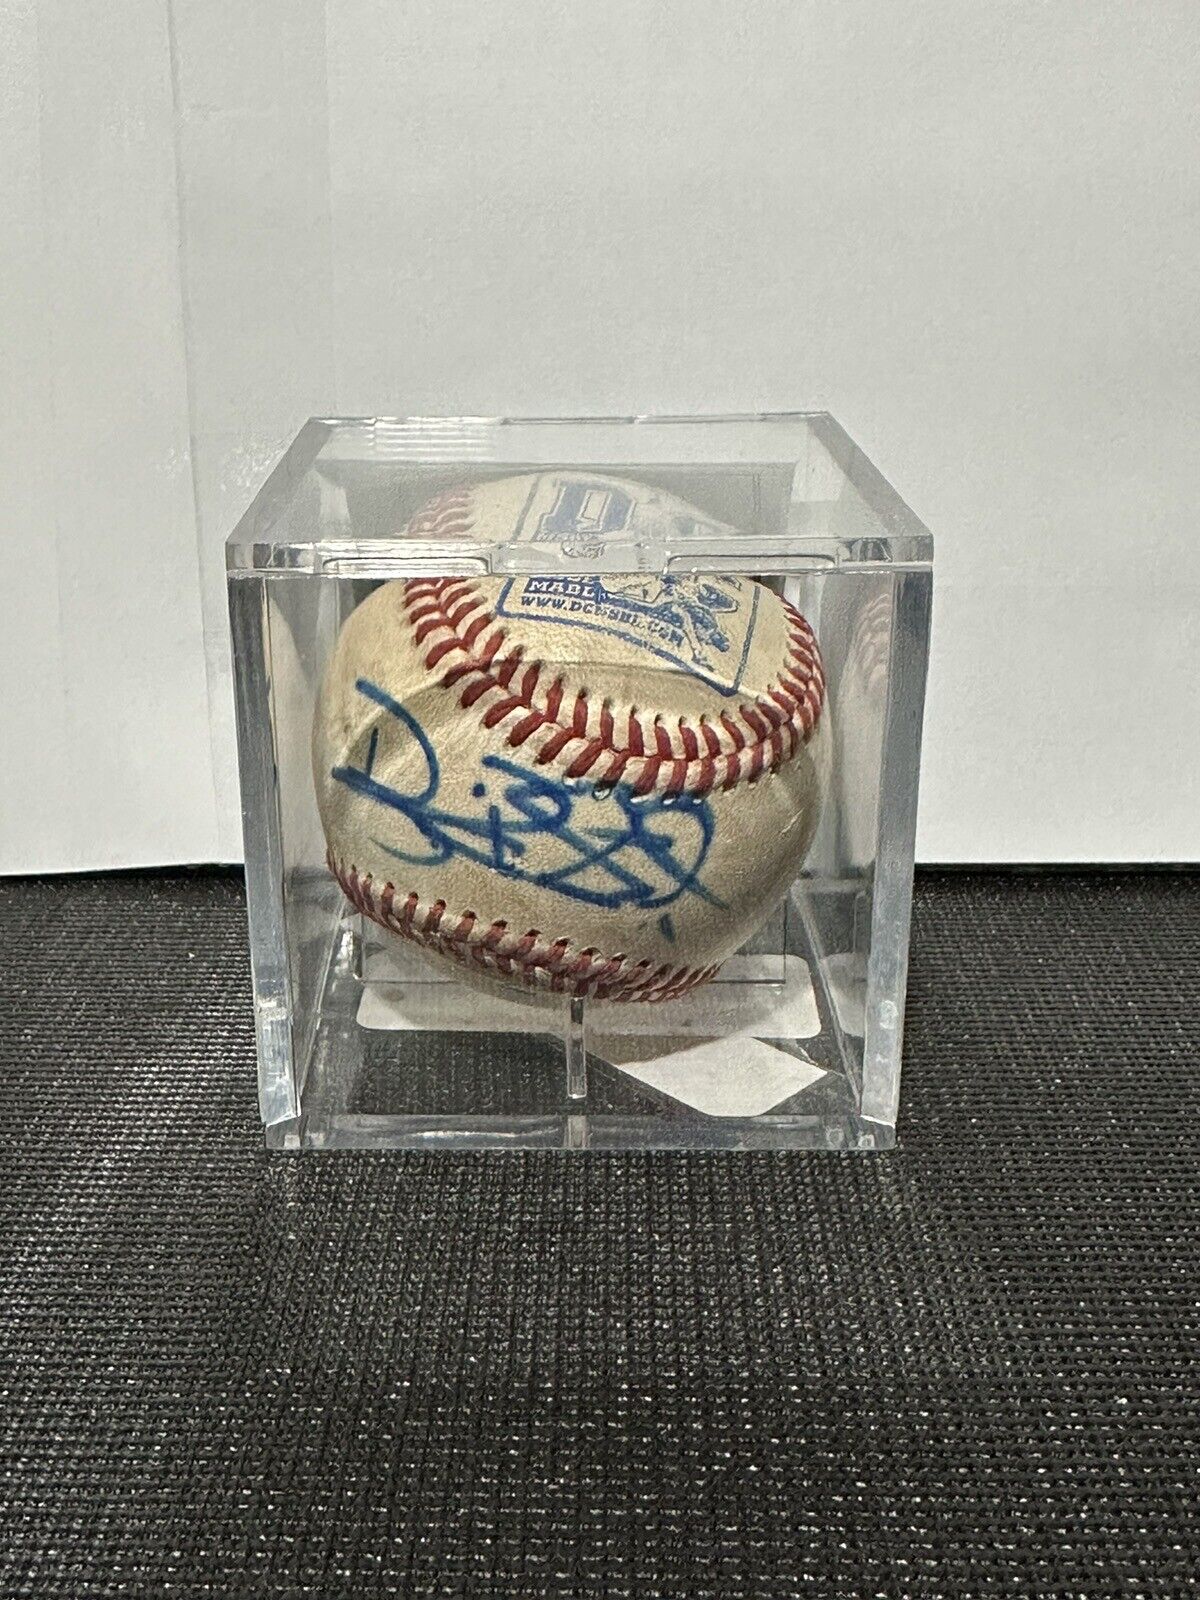 Signed Brian Roberts Baseball COA from RJB Enterprise with a hard protector